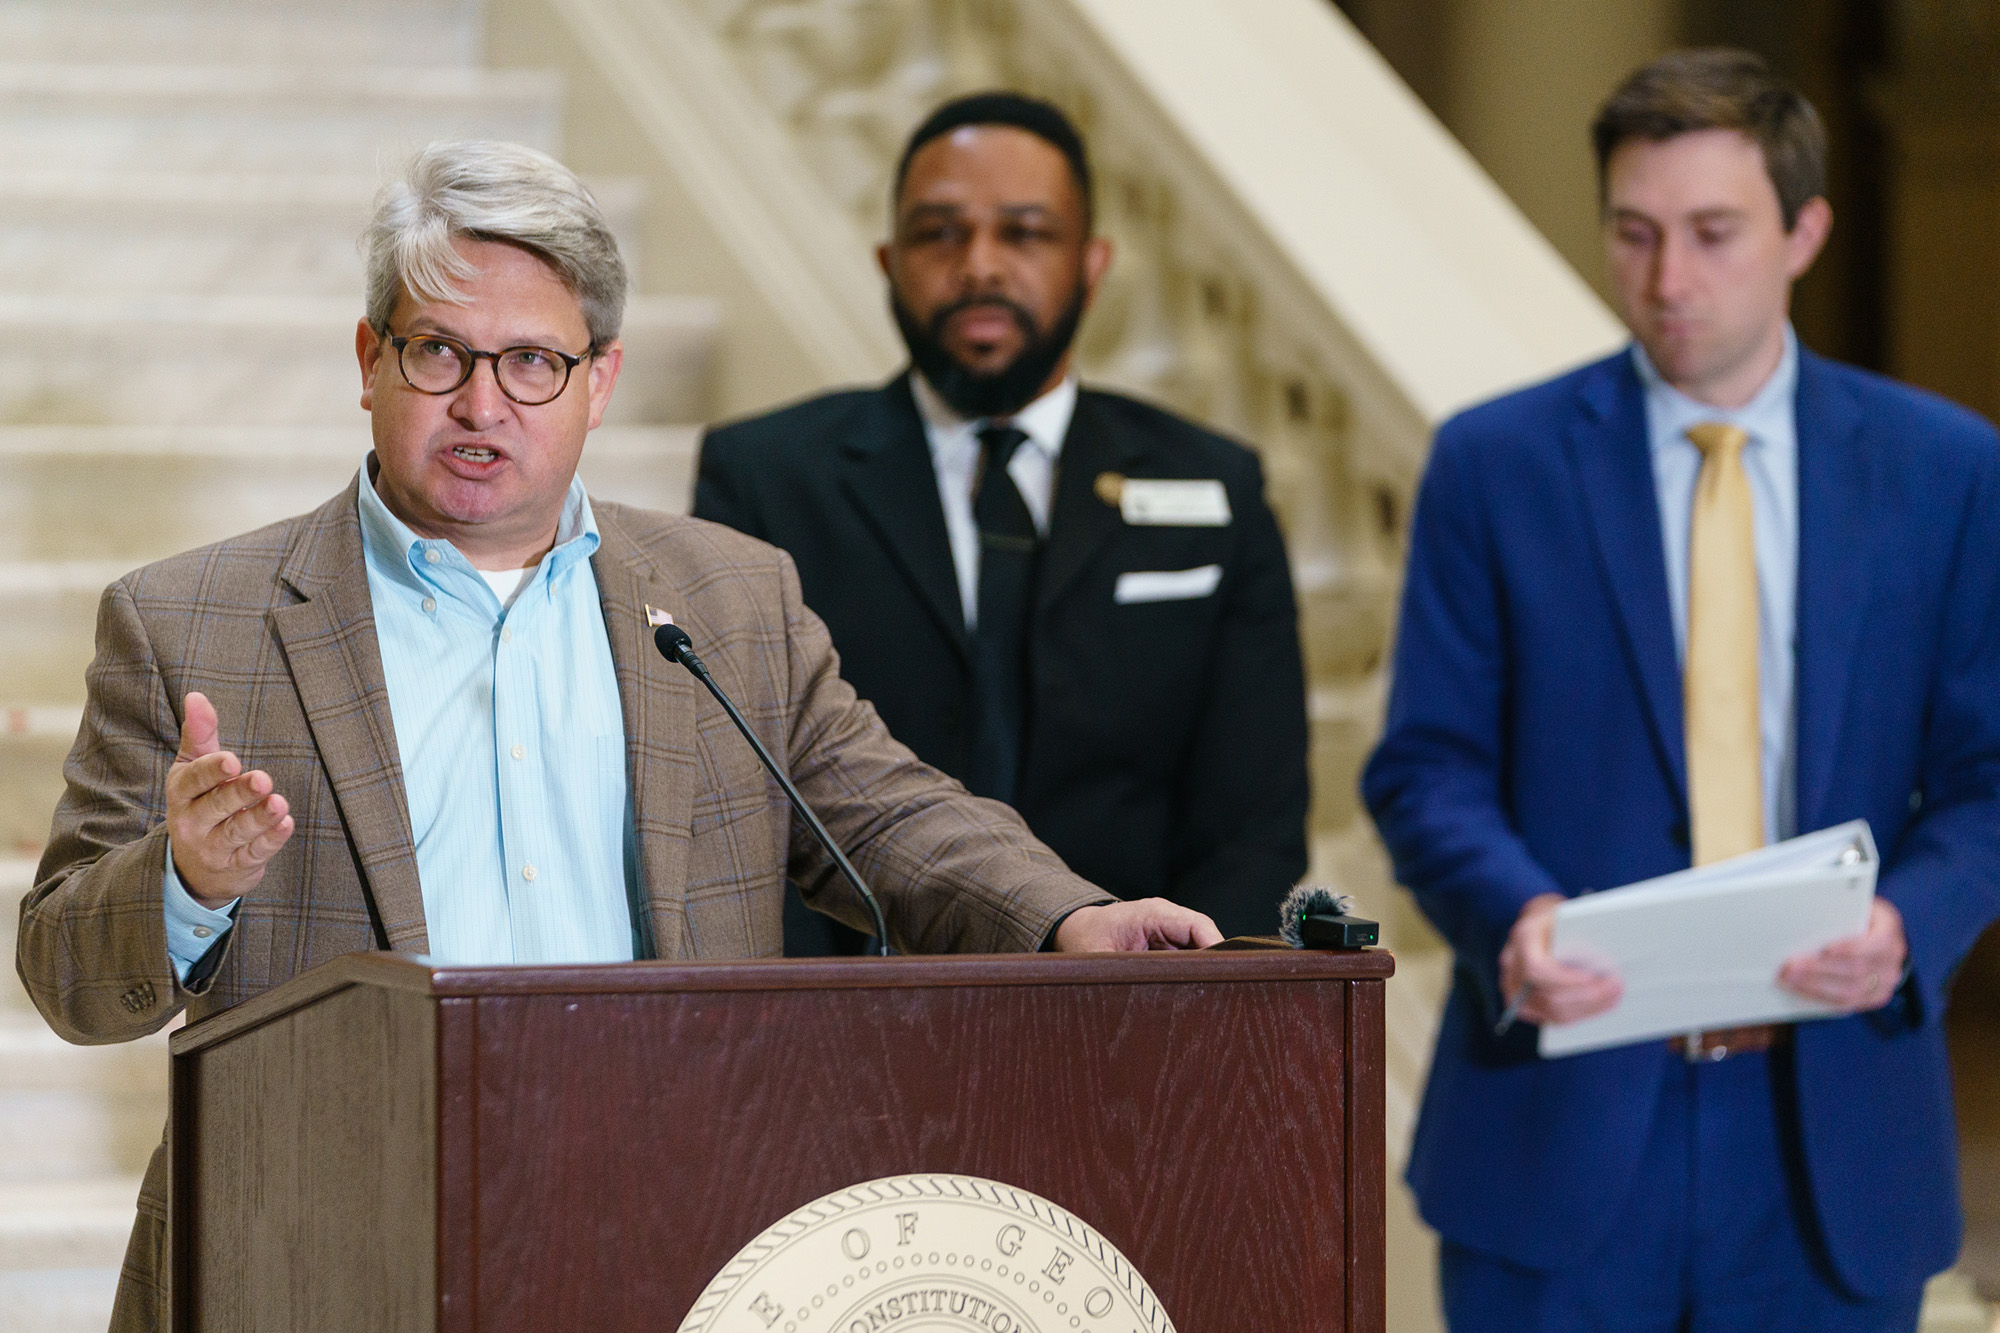 PHOTO: Georgia Secretary of State Chief Operating Officer Gabriel Sterling speaks to the media about early voting progress in Atlanta, October 25, 2022.